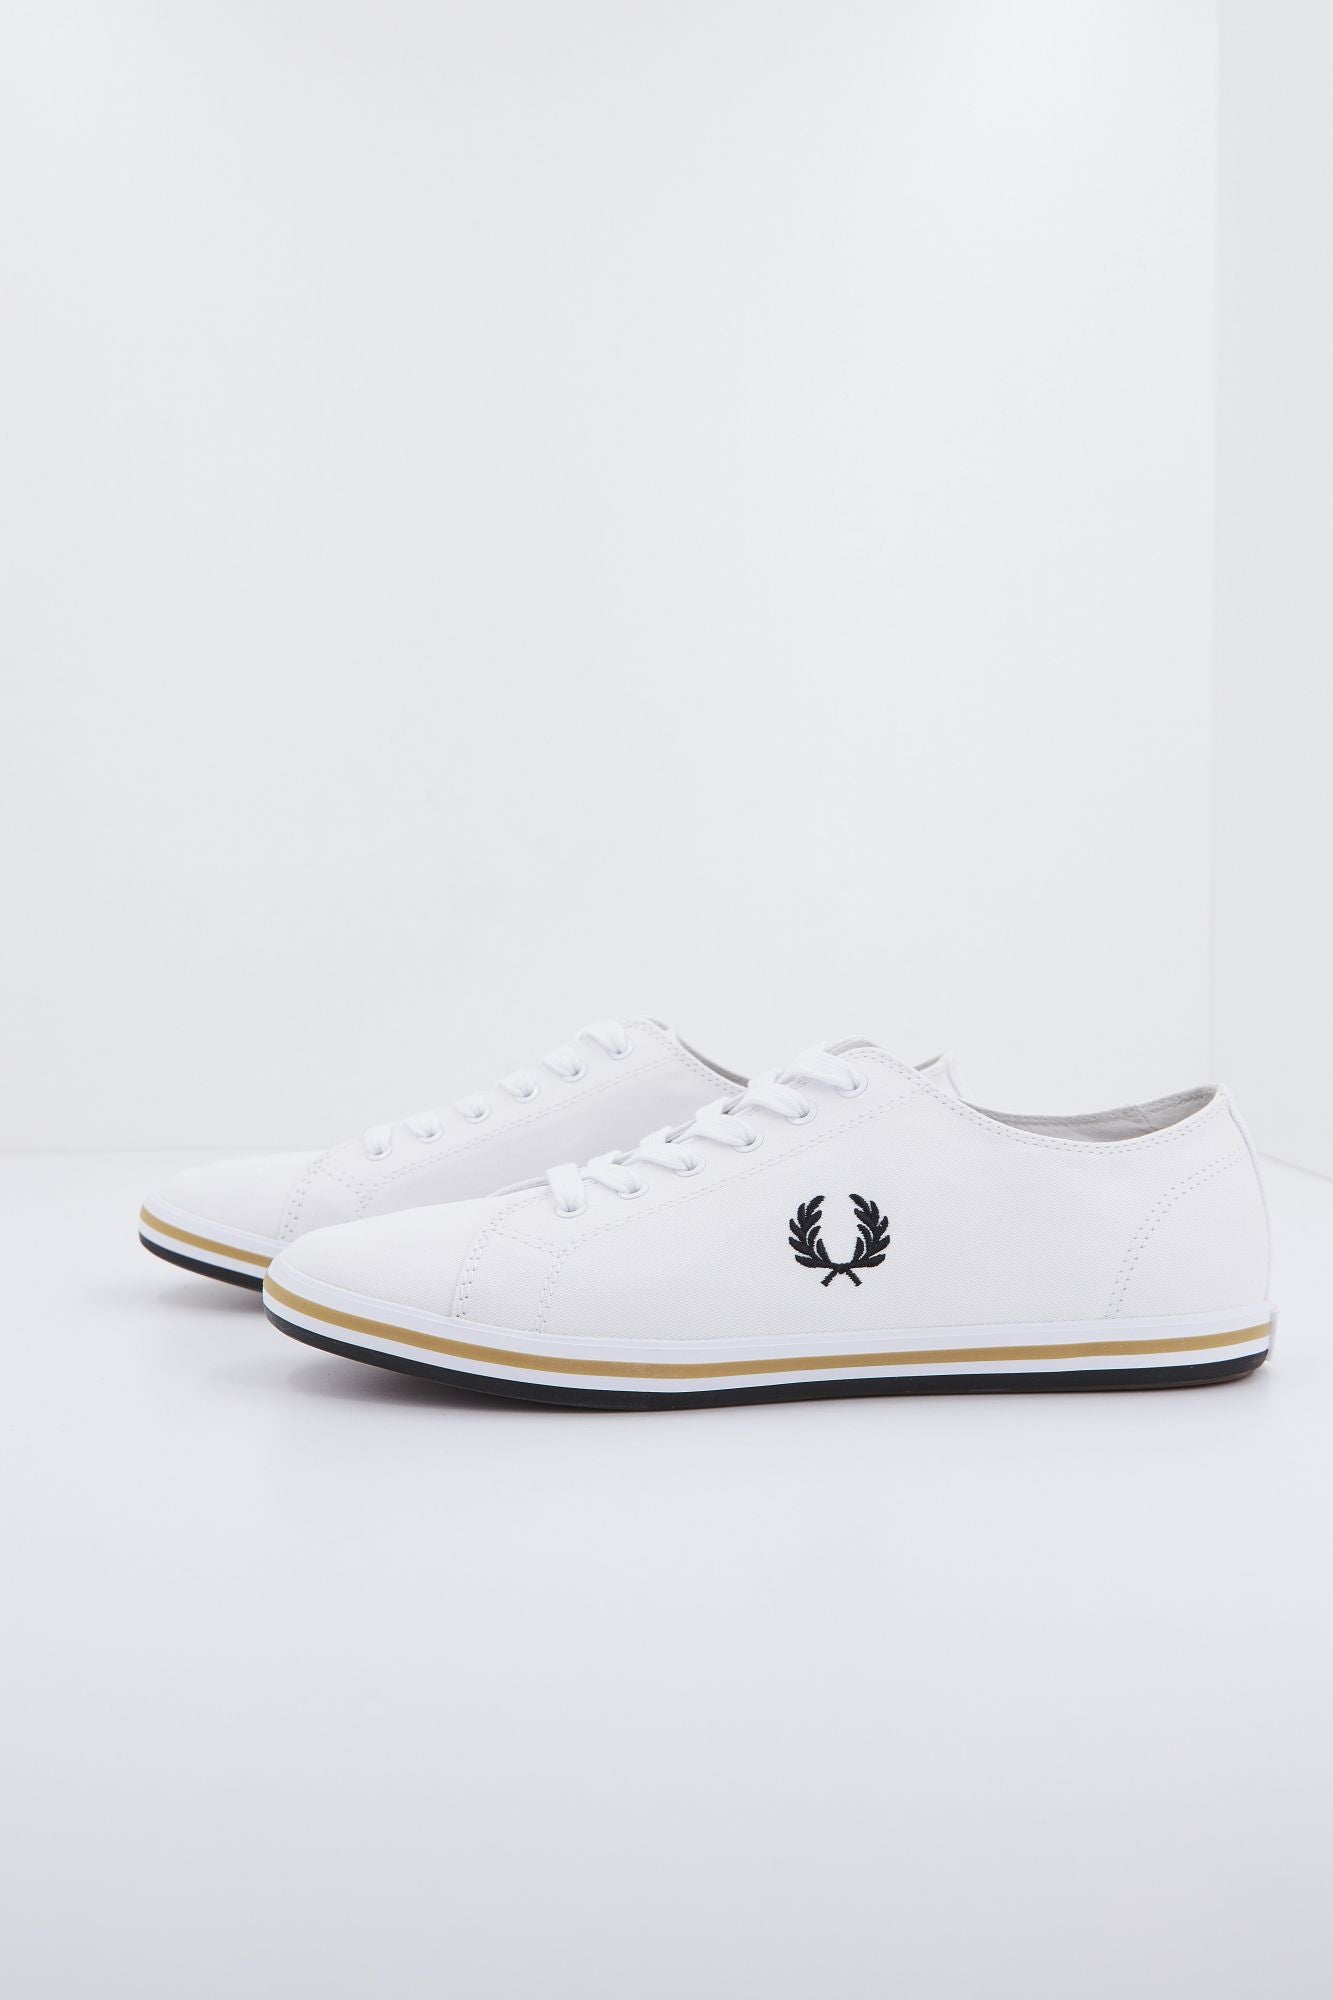 FRED PERRY KINGSTON TWILL en color BLANCO (3)